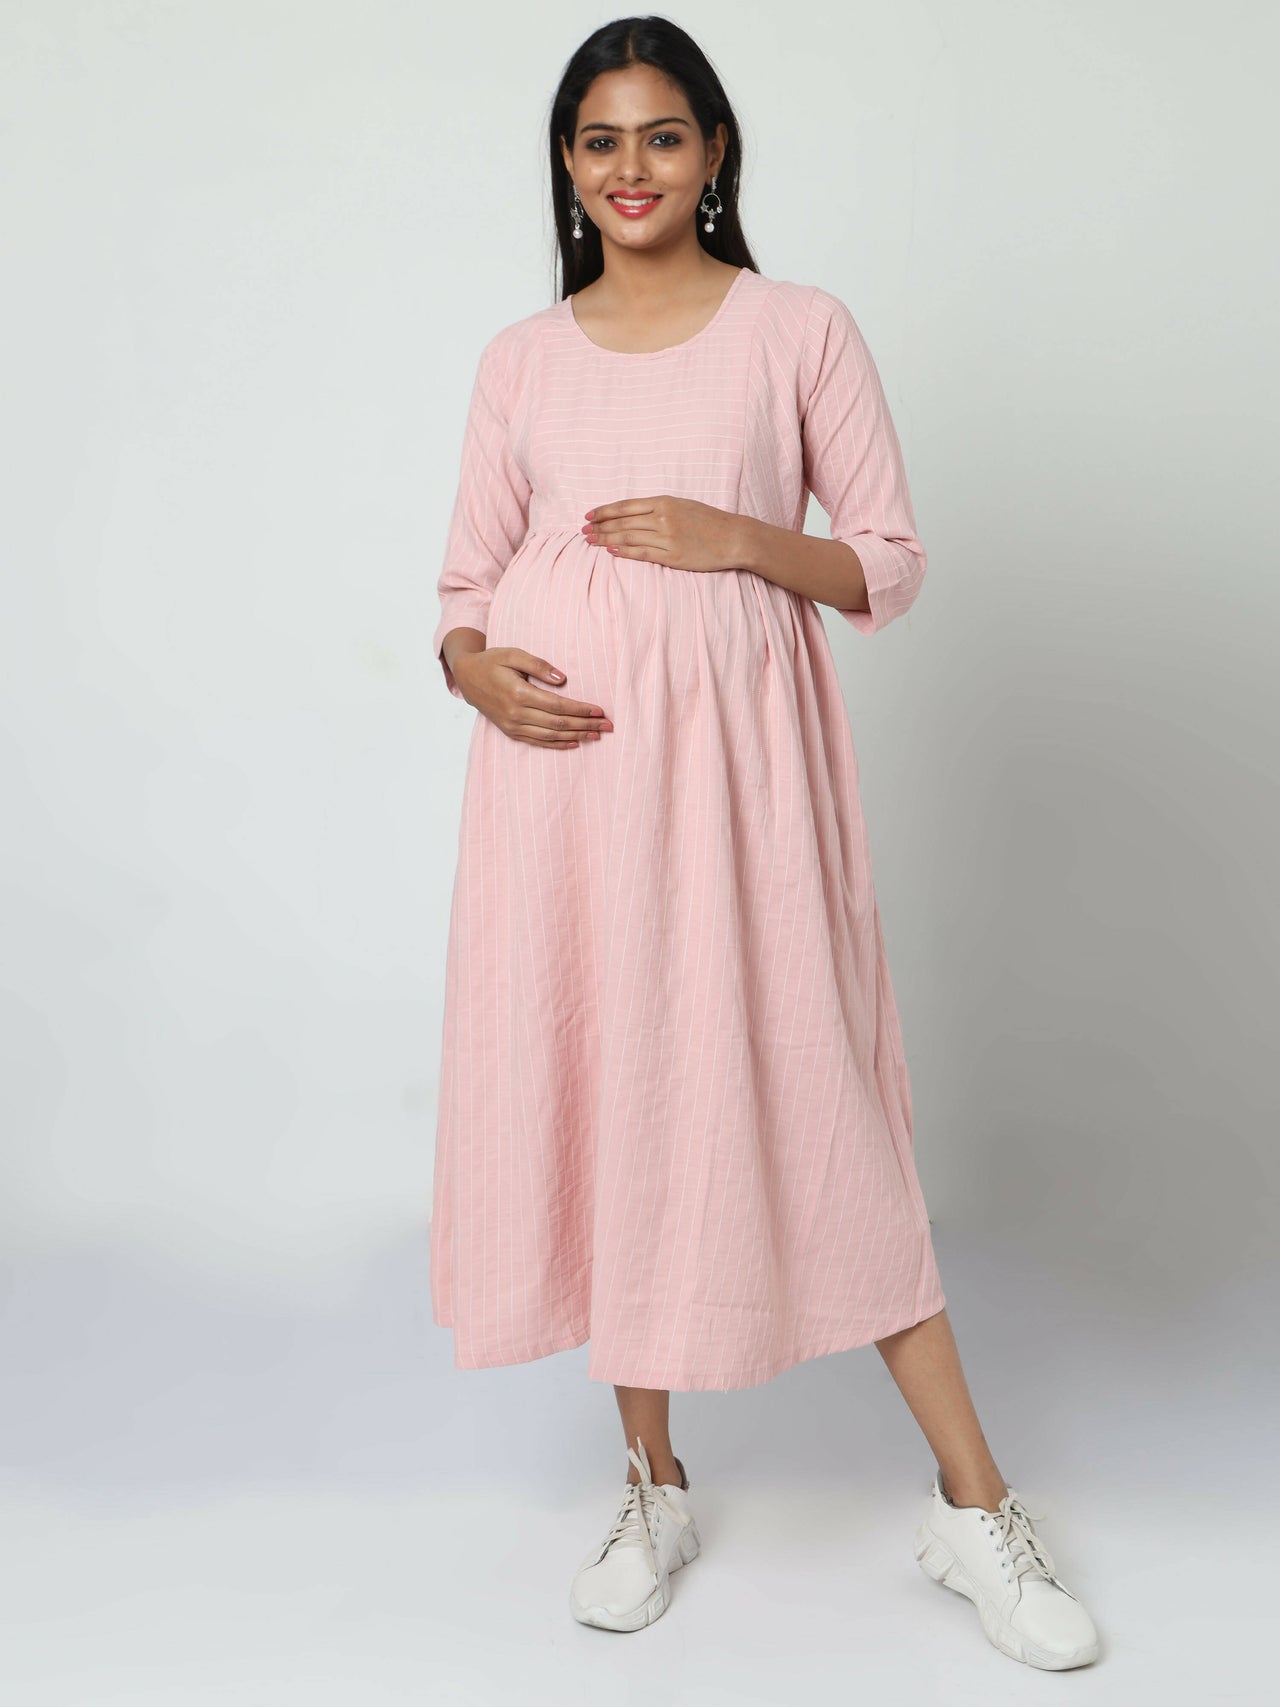 Manet Three Fourth Maternity Dress Striped With Concealed Zipper Nursing Access - Baby Pink - Distacart